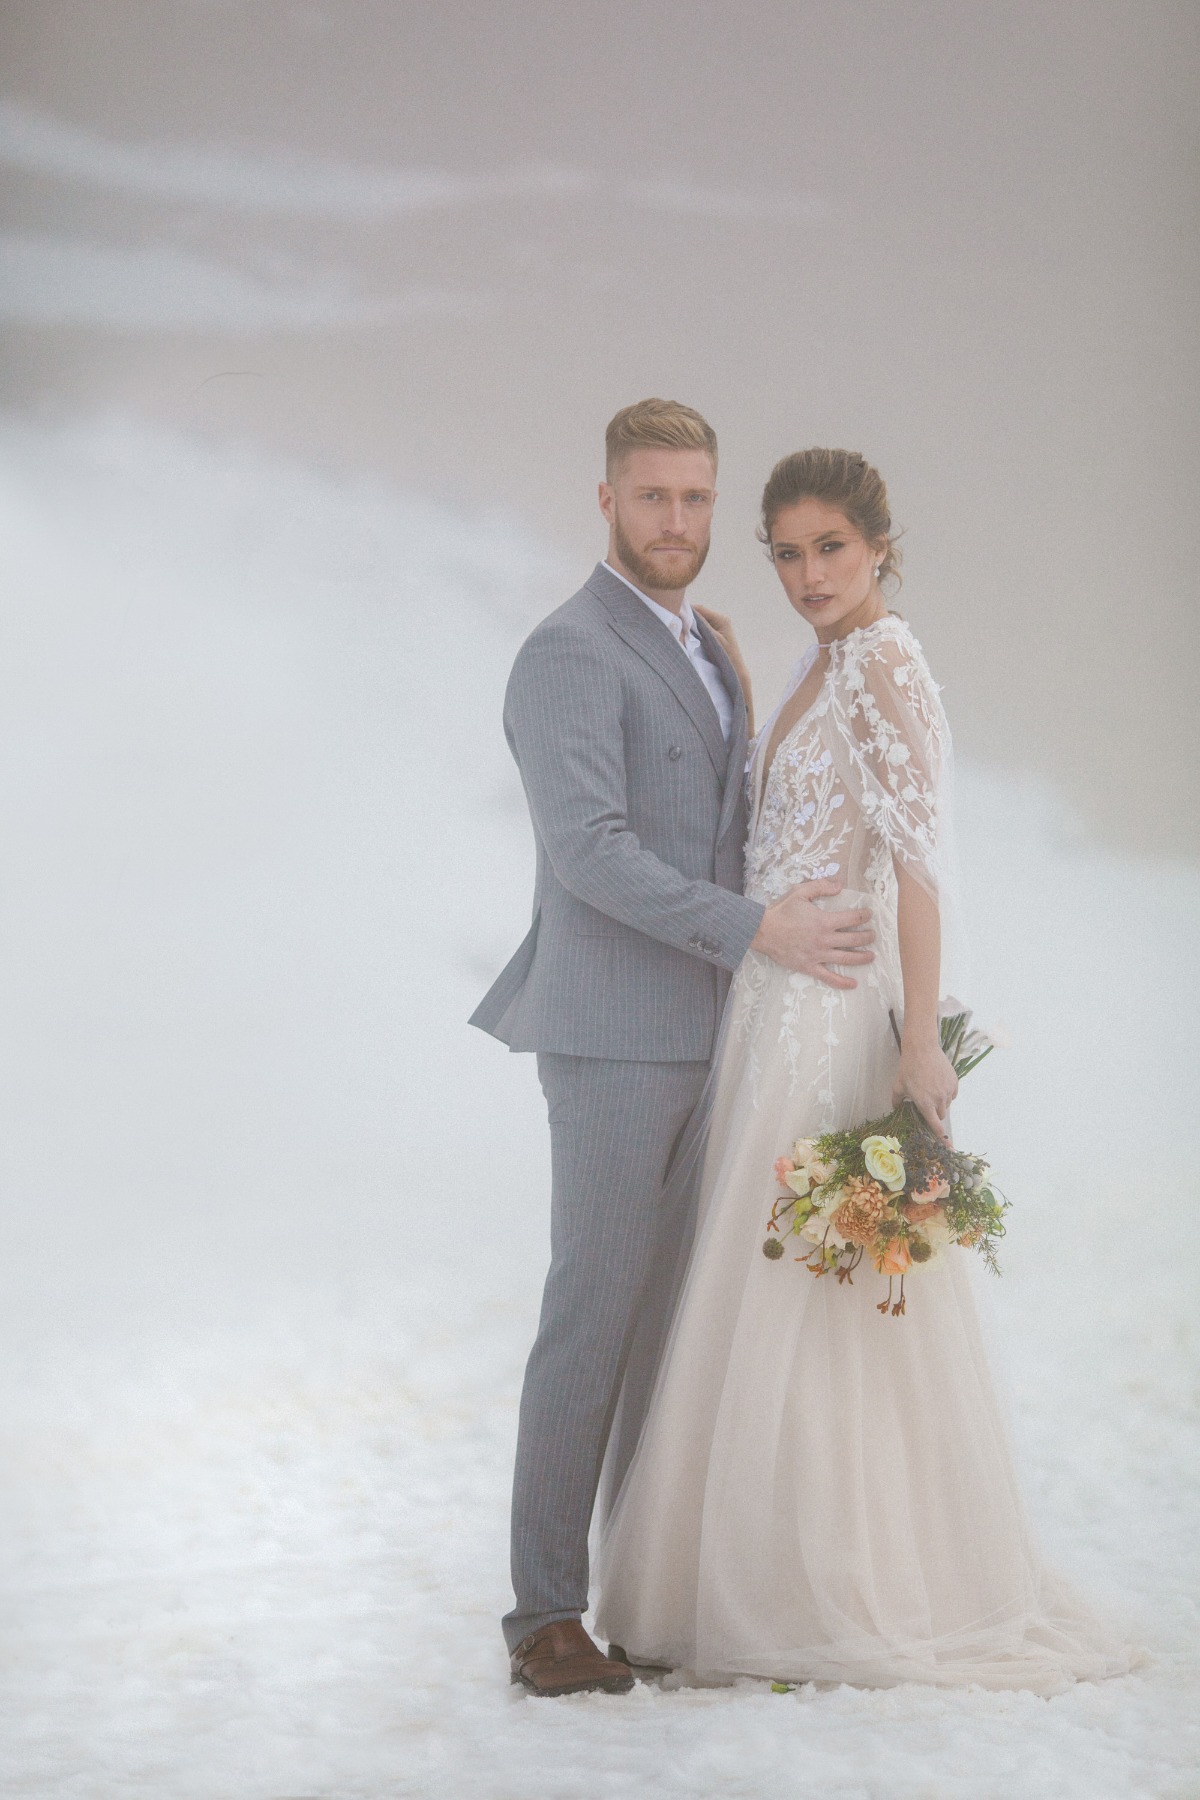 Snowy winter wedding pose ideas for bride and groom outside